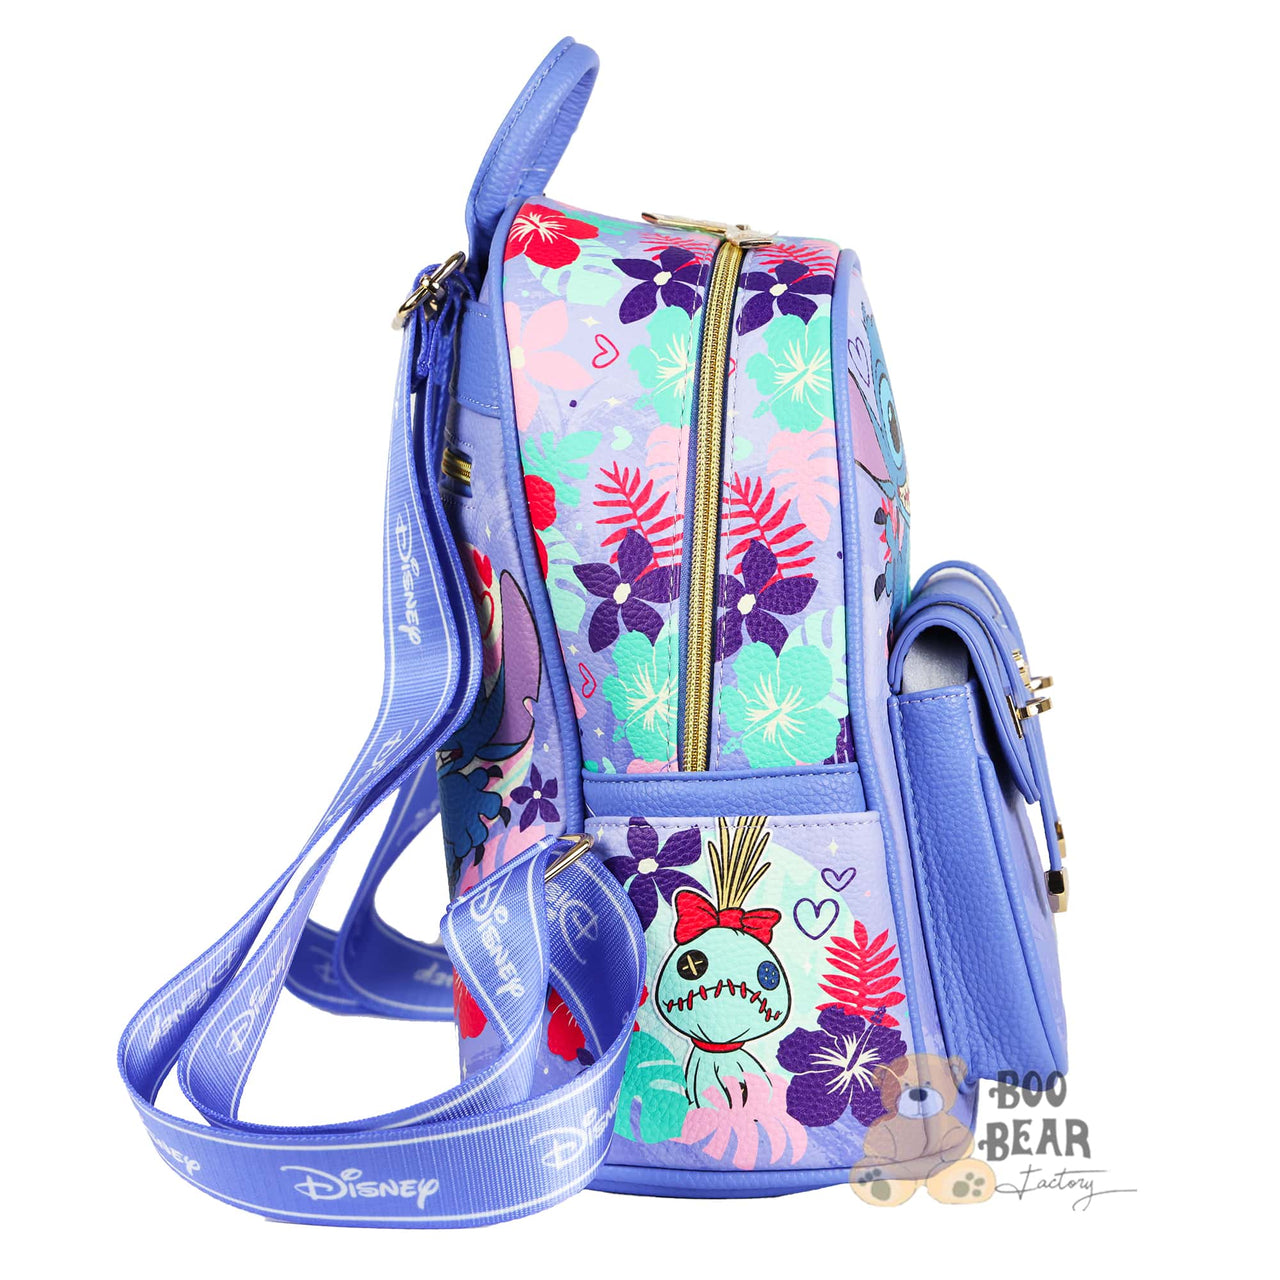 Disney Stitch Backpack right